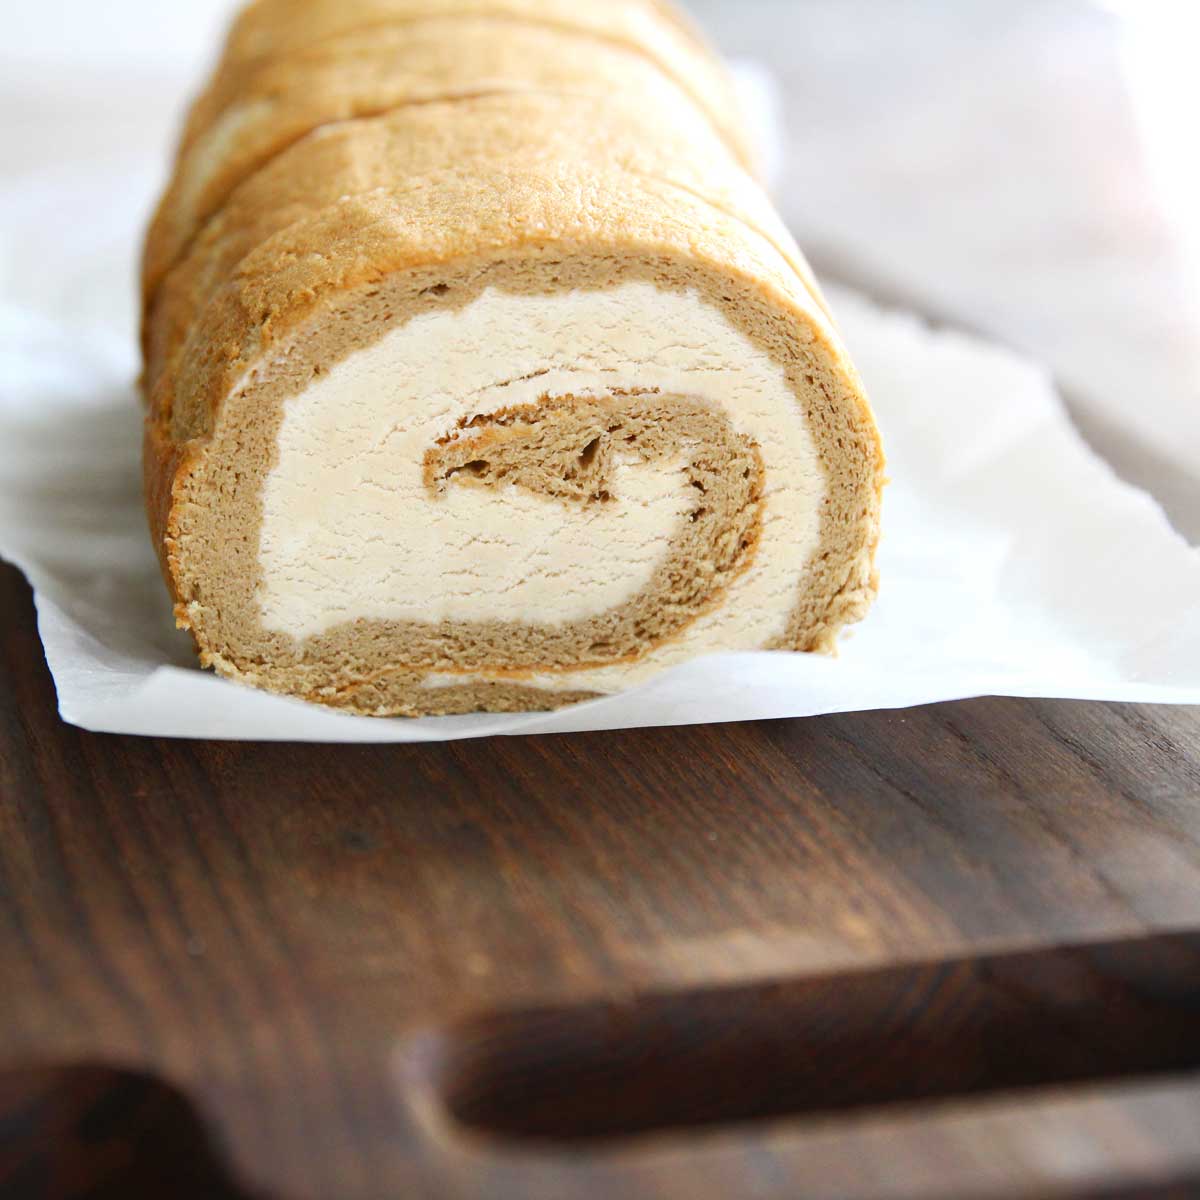 The Best Coffee Roll Cake You'll Ever Make (With a Secret Ingredient!) - Strawberry Japanese Roll Cake